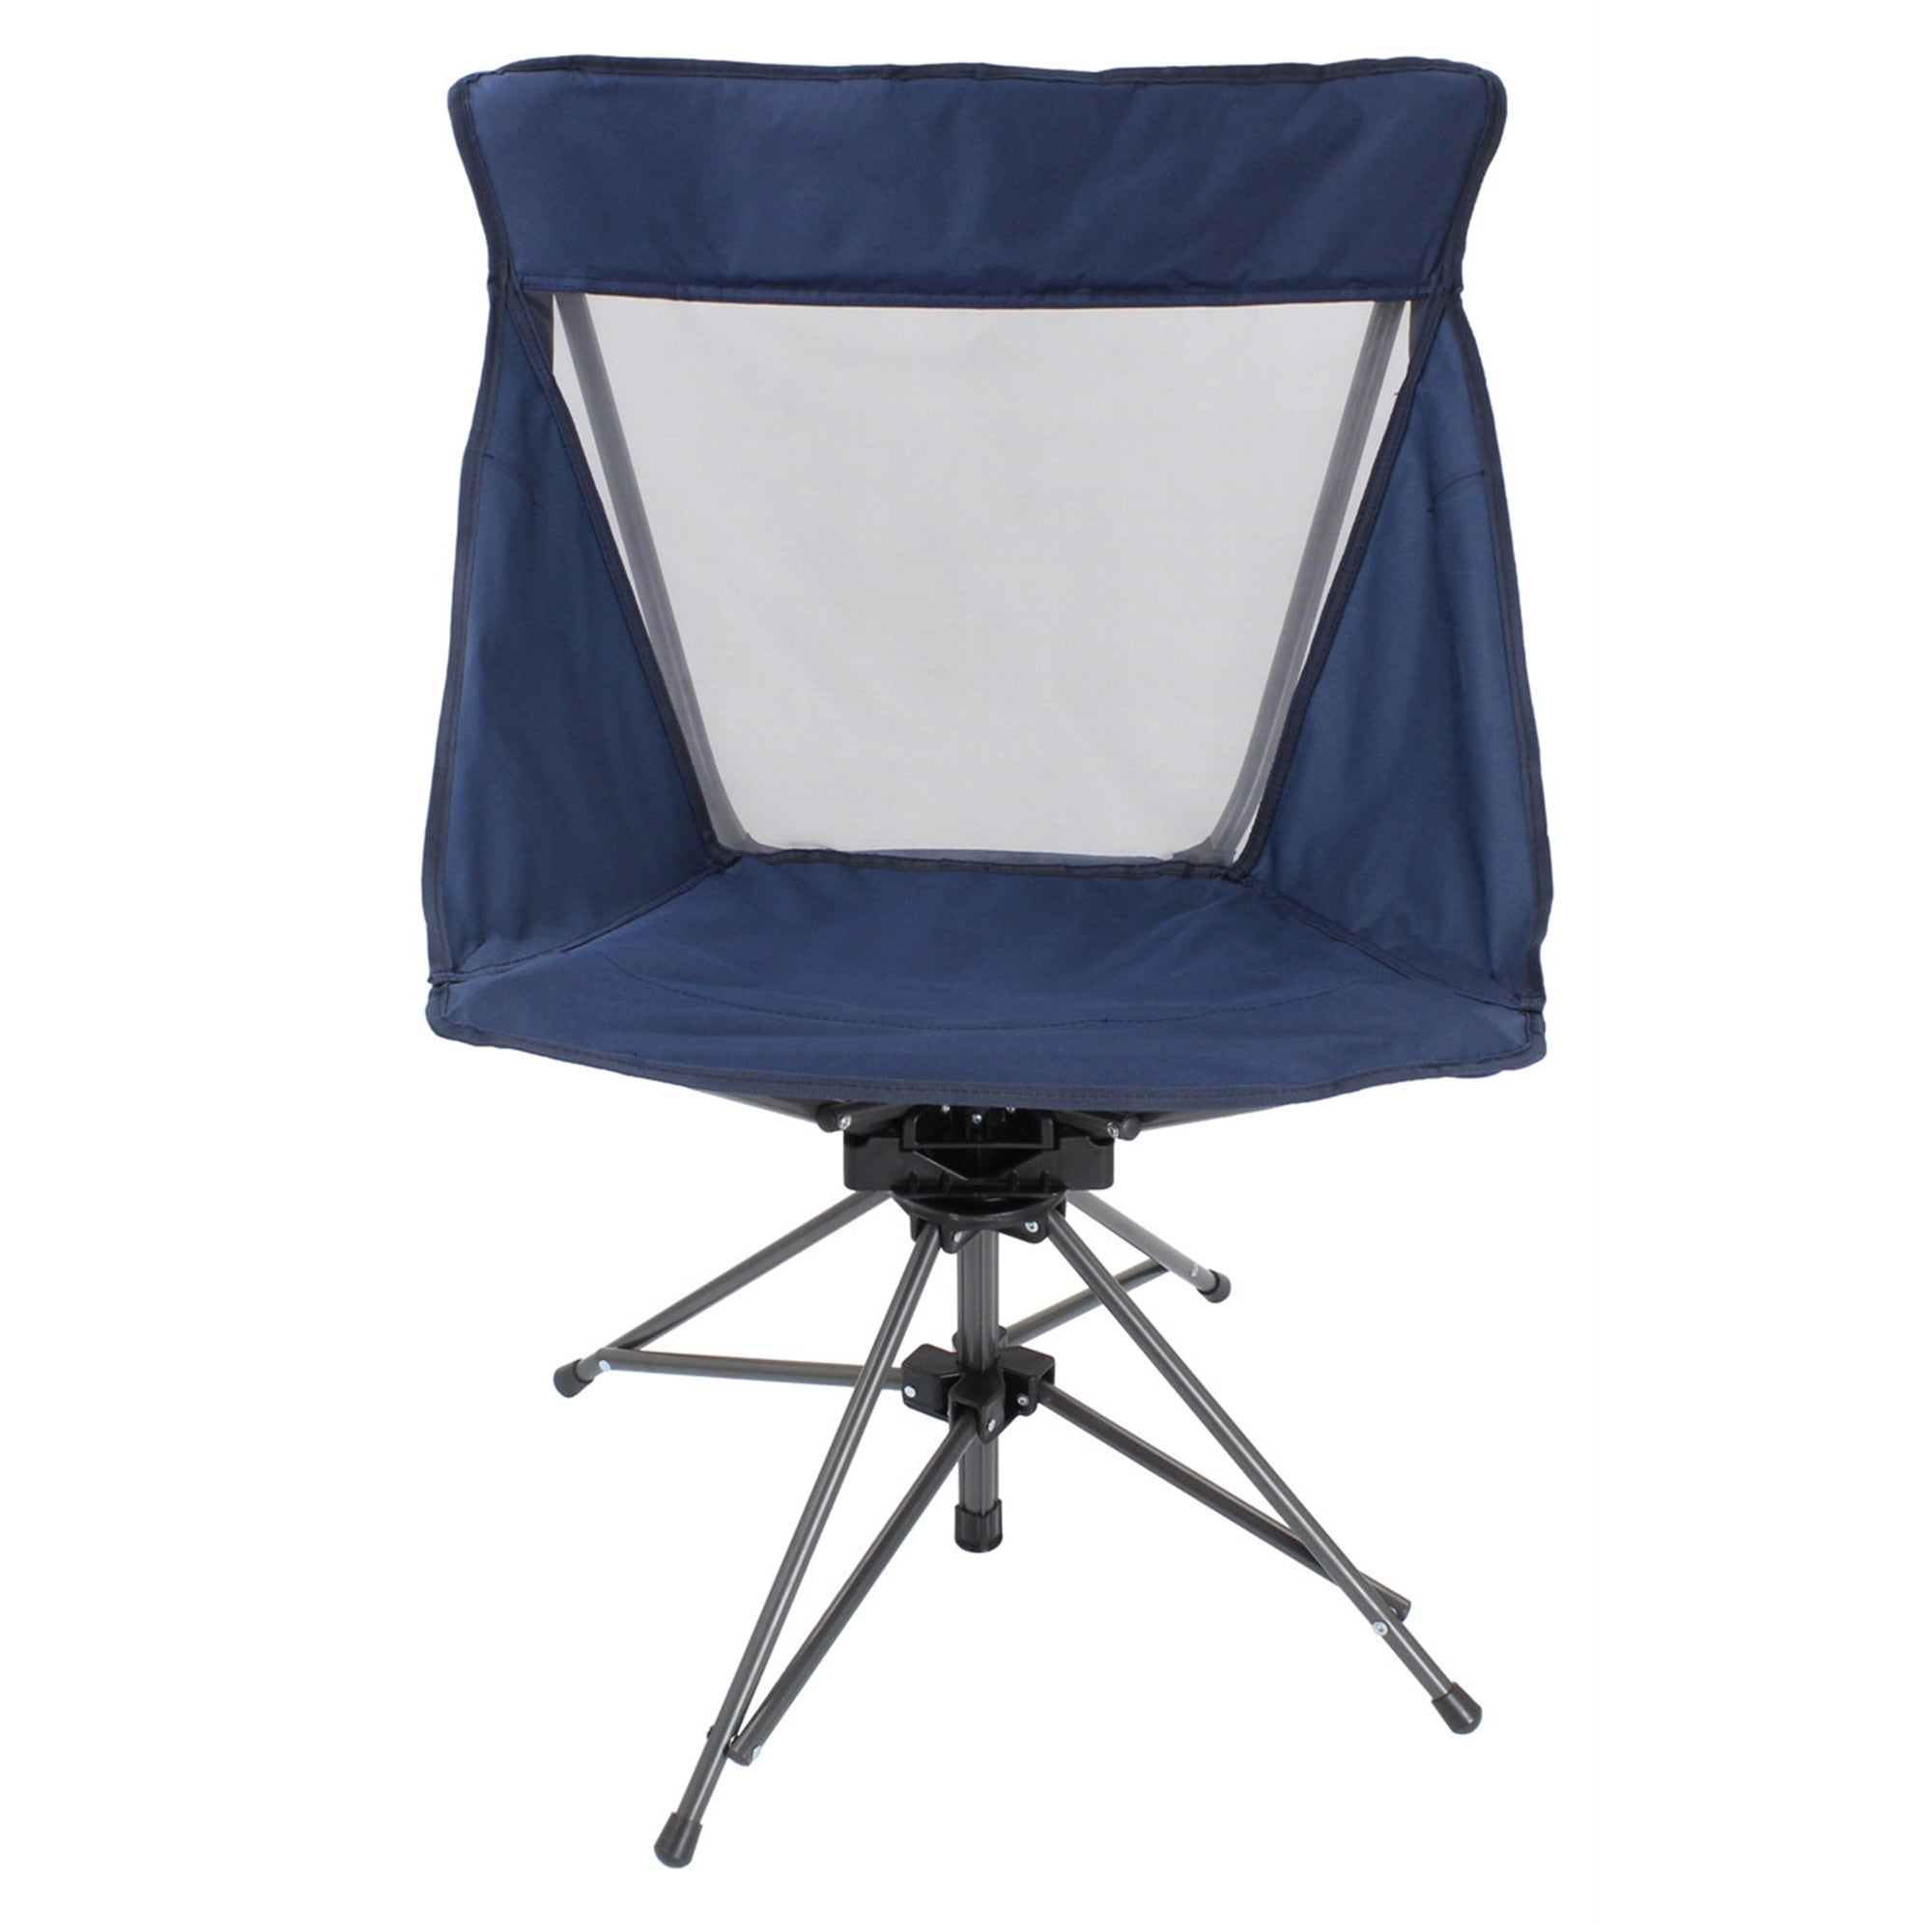 Zenithen Limited Swivel Folding Chair, Navy Color With Mesh Back Cool Seating